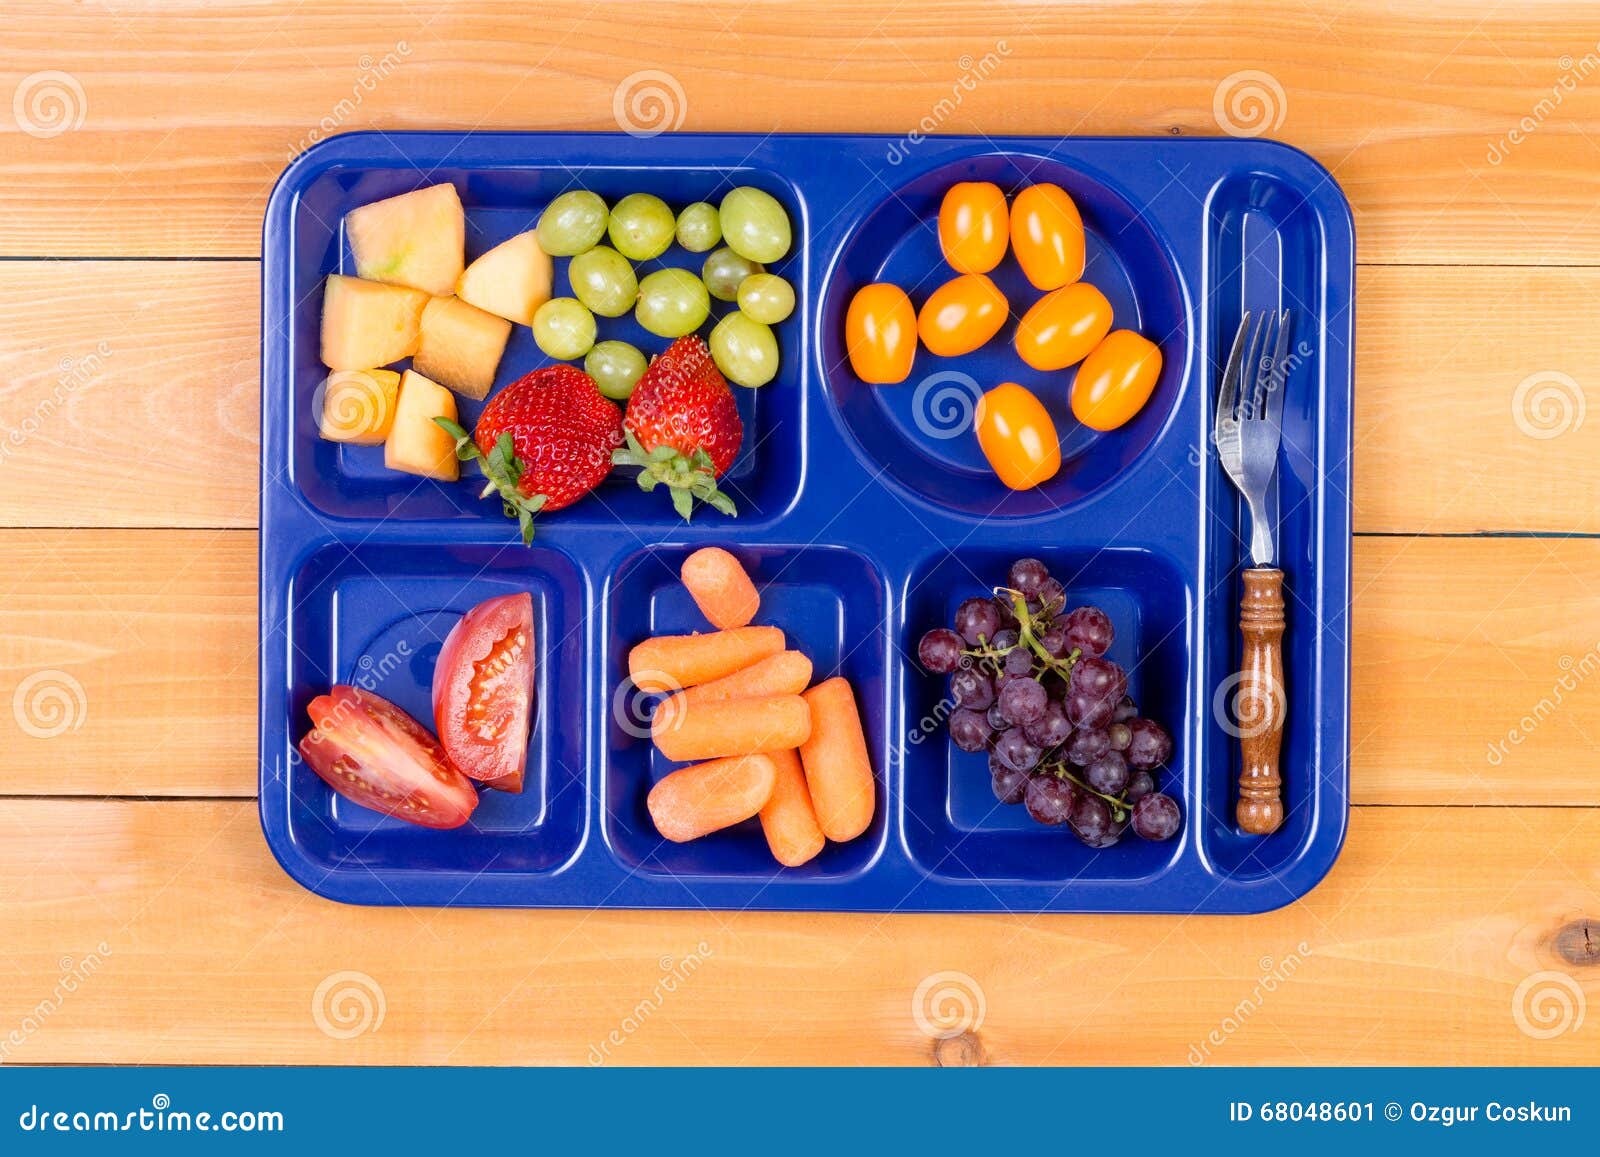 fruit sampler in lunch tray with fork